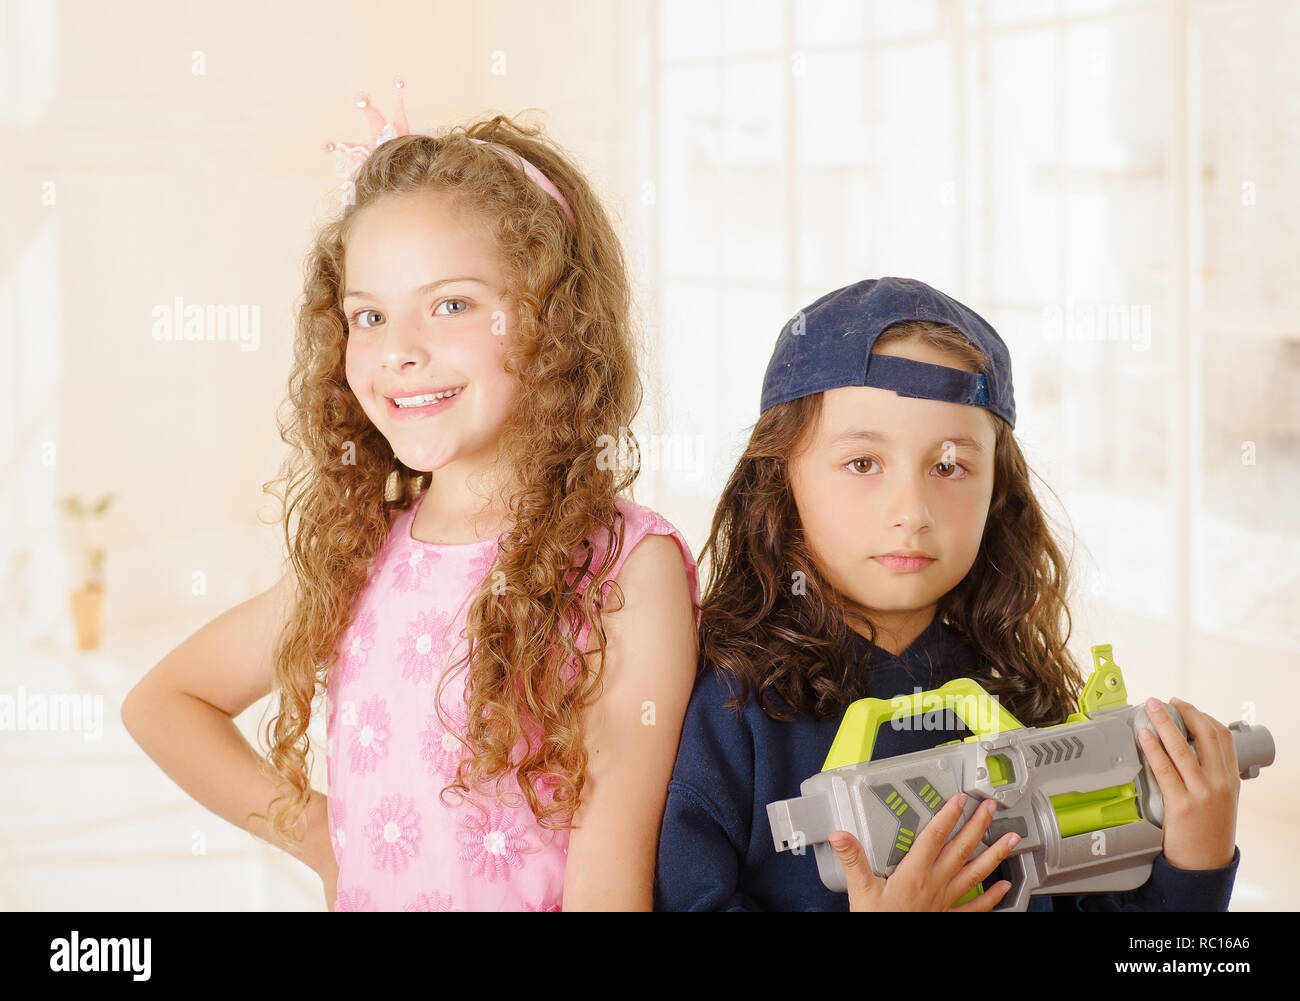 Close up of two girls one is wering boy clothes and holding a gun and other girl is wearing a pink princess dress Stock Photo